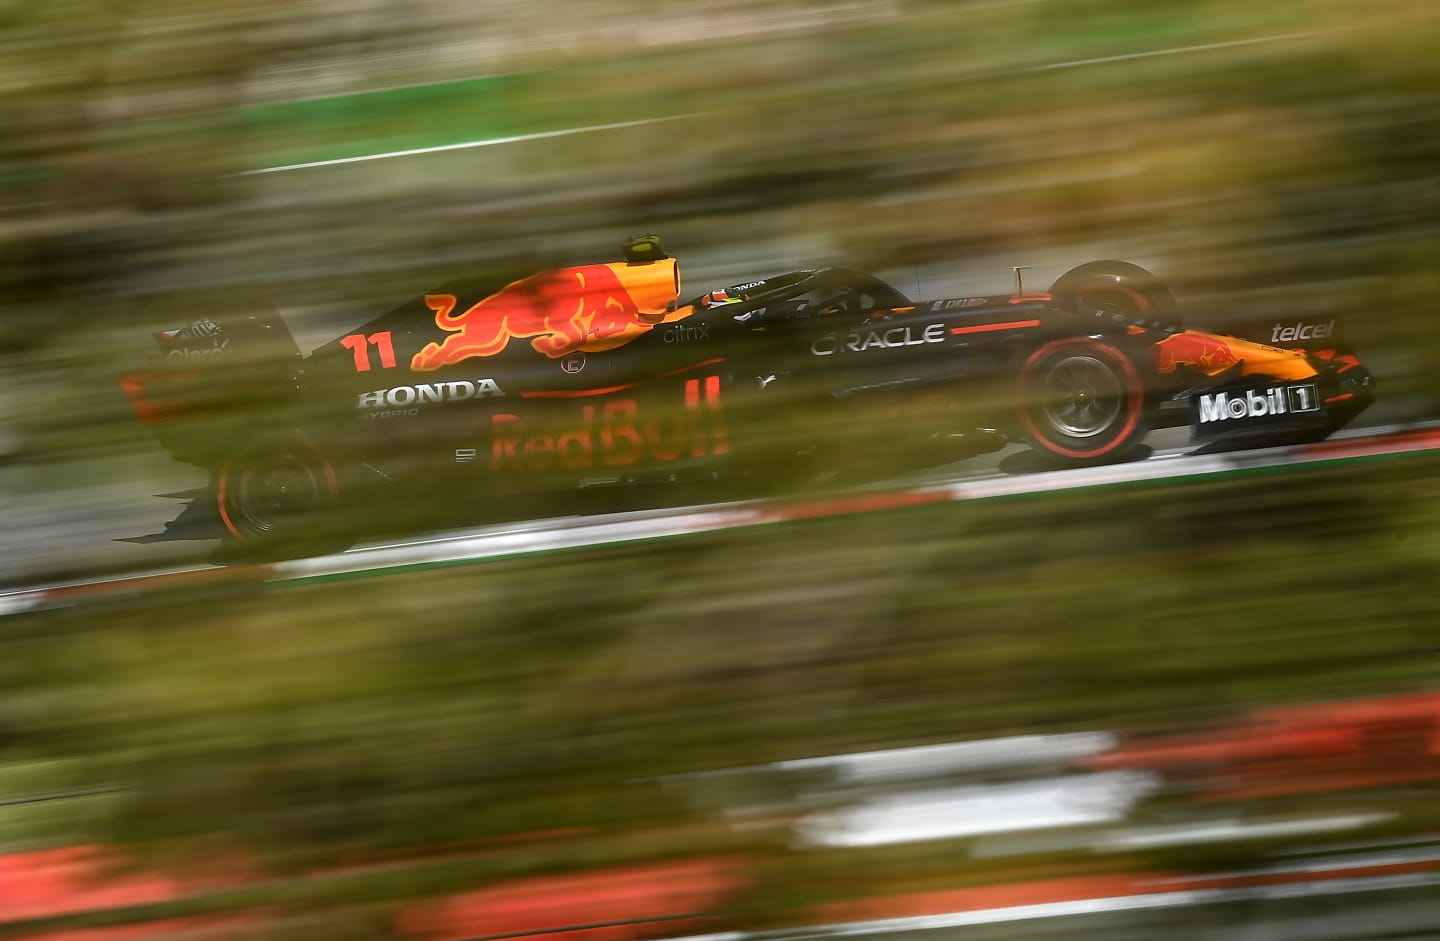 BARCELONA, SPAIN - MAY 07: Sergio Perez of Mexico driving the (11) Red Bull Racing RB16B Honda during practice for the F1 Grand Prix of Spain at Circuit de Barcelona-Catalunya on May 07, 2021 in Barcelona, Spain. (Photo by Clive Mason - Formula 1/Formula 1 via Getty Images)